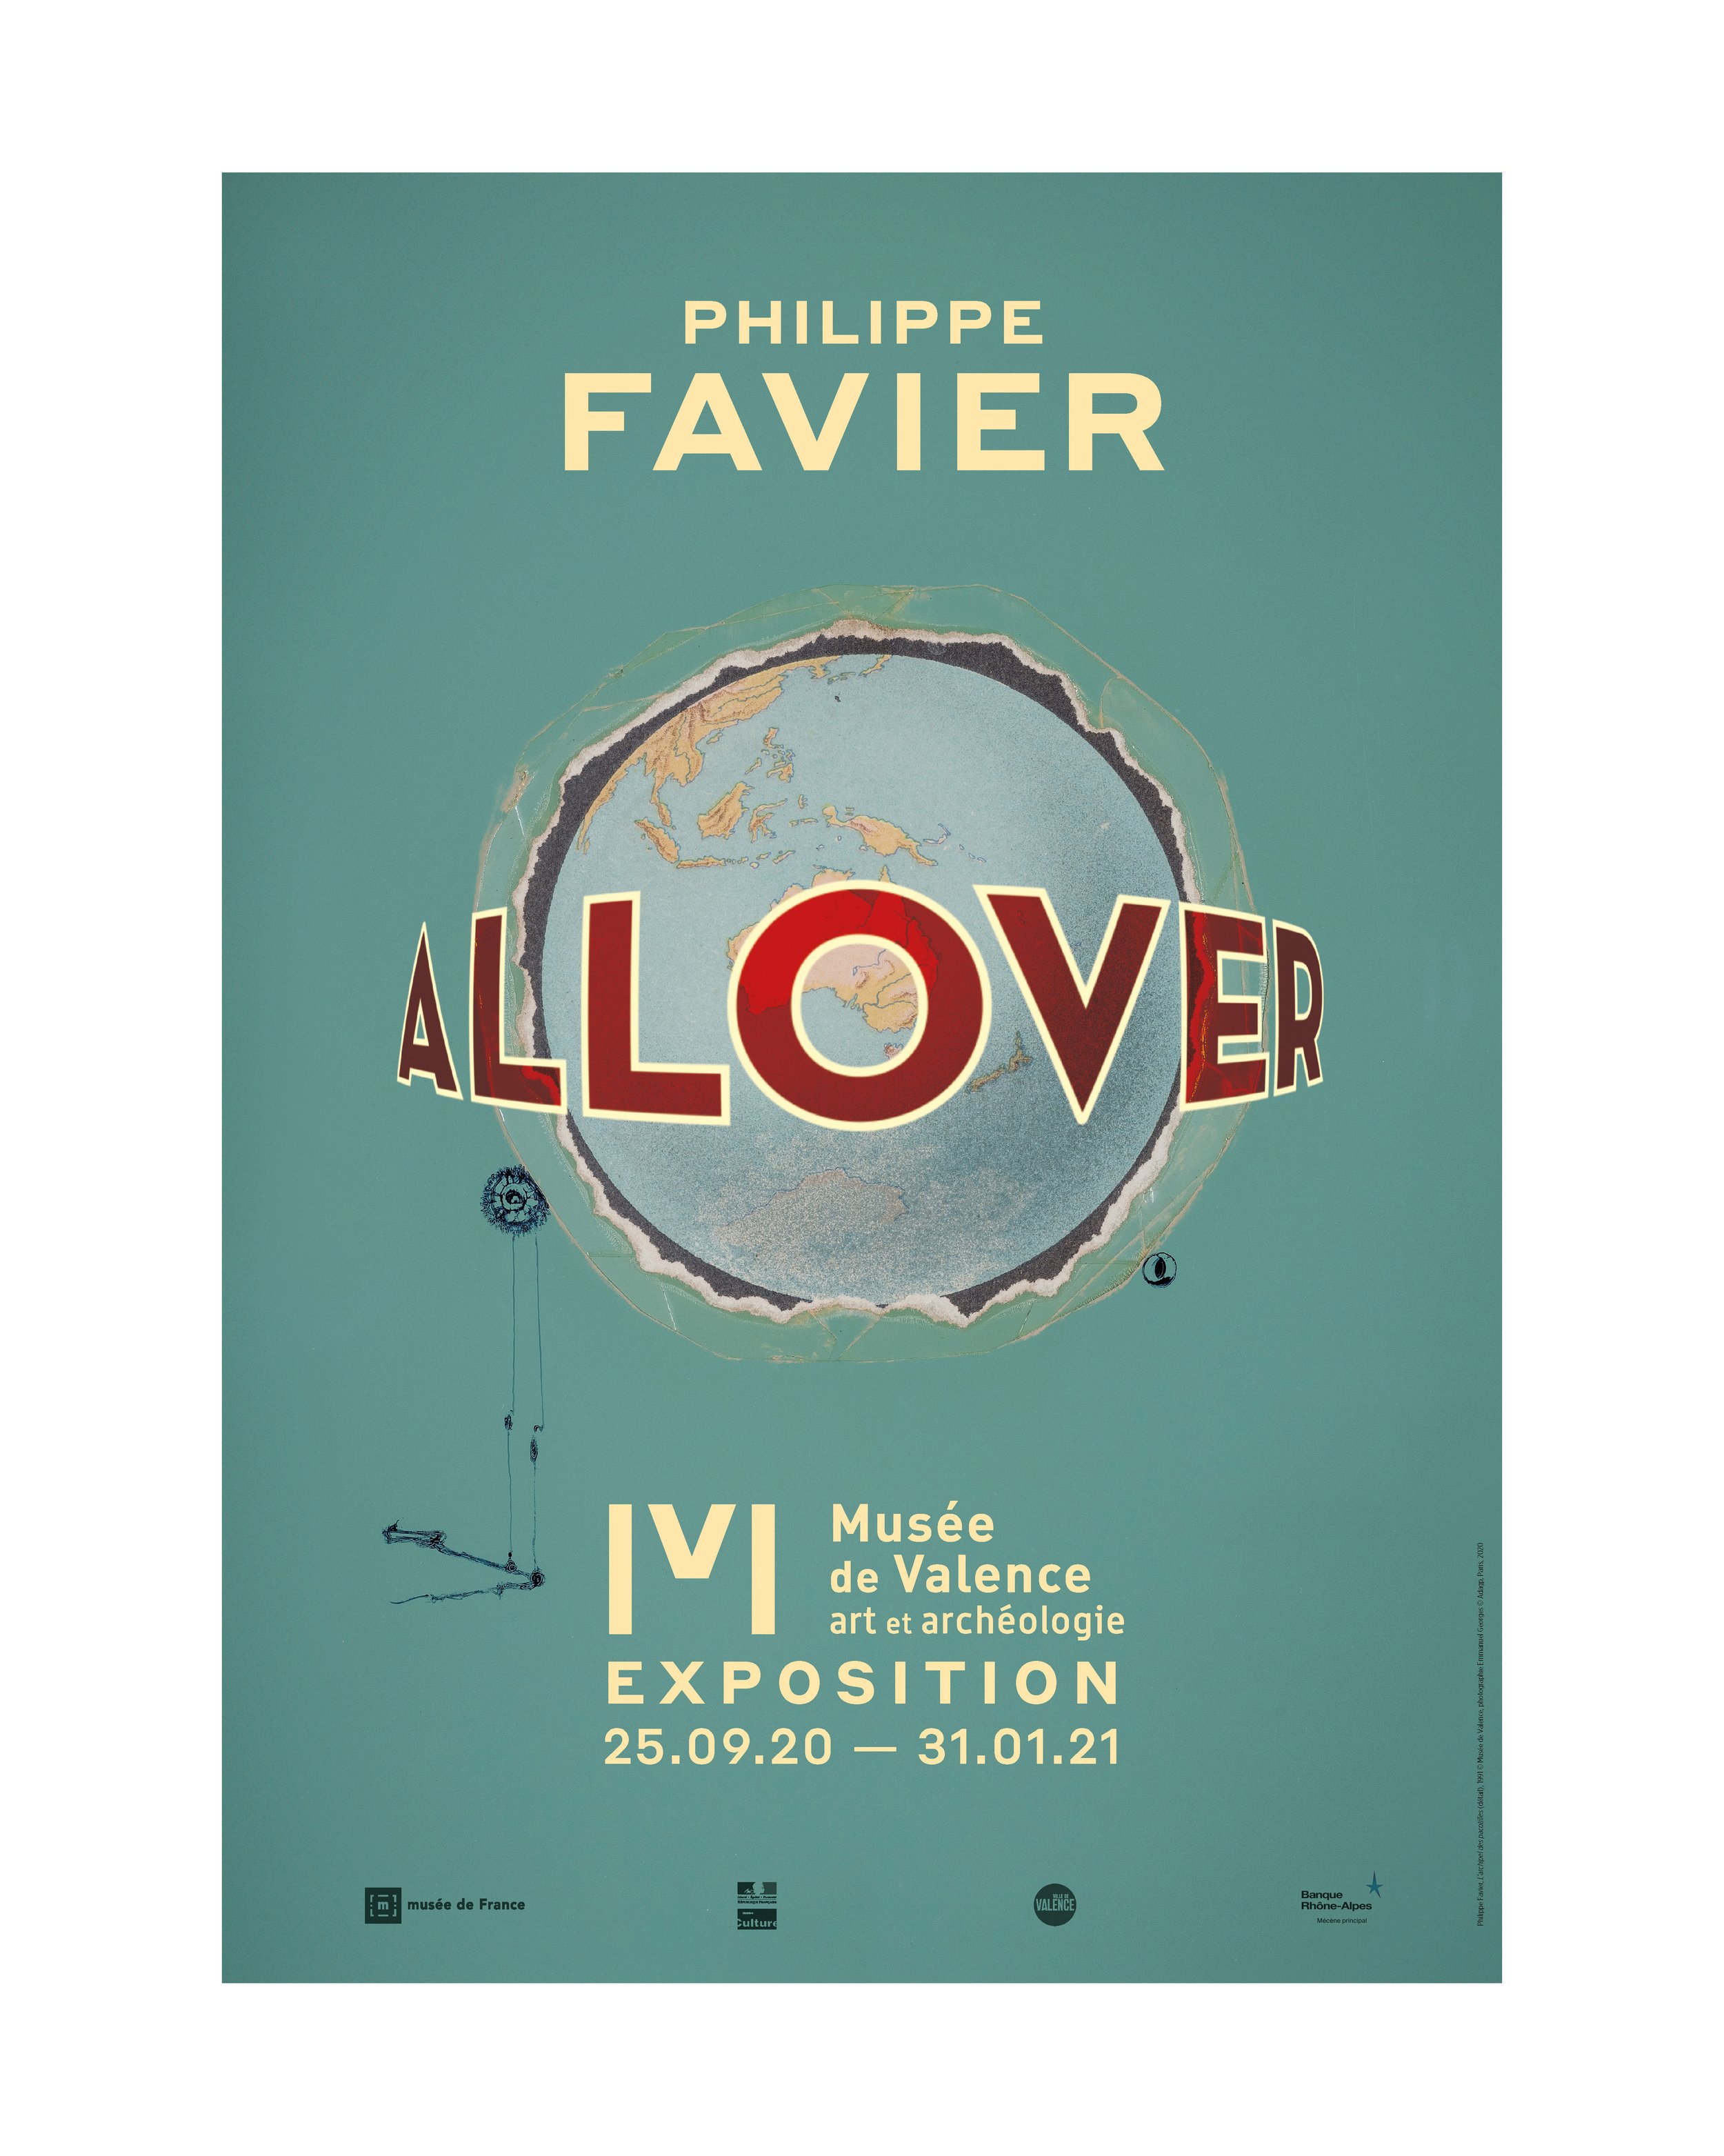  Exposition  Philippe Favier All-Over  Affiches  Musée de Valence 